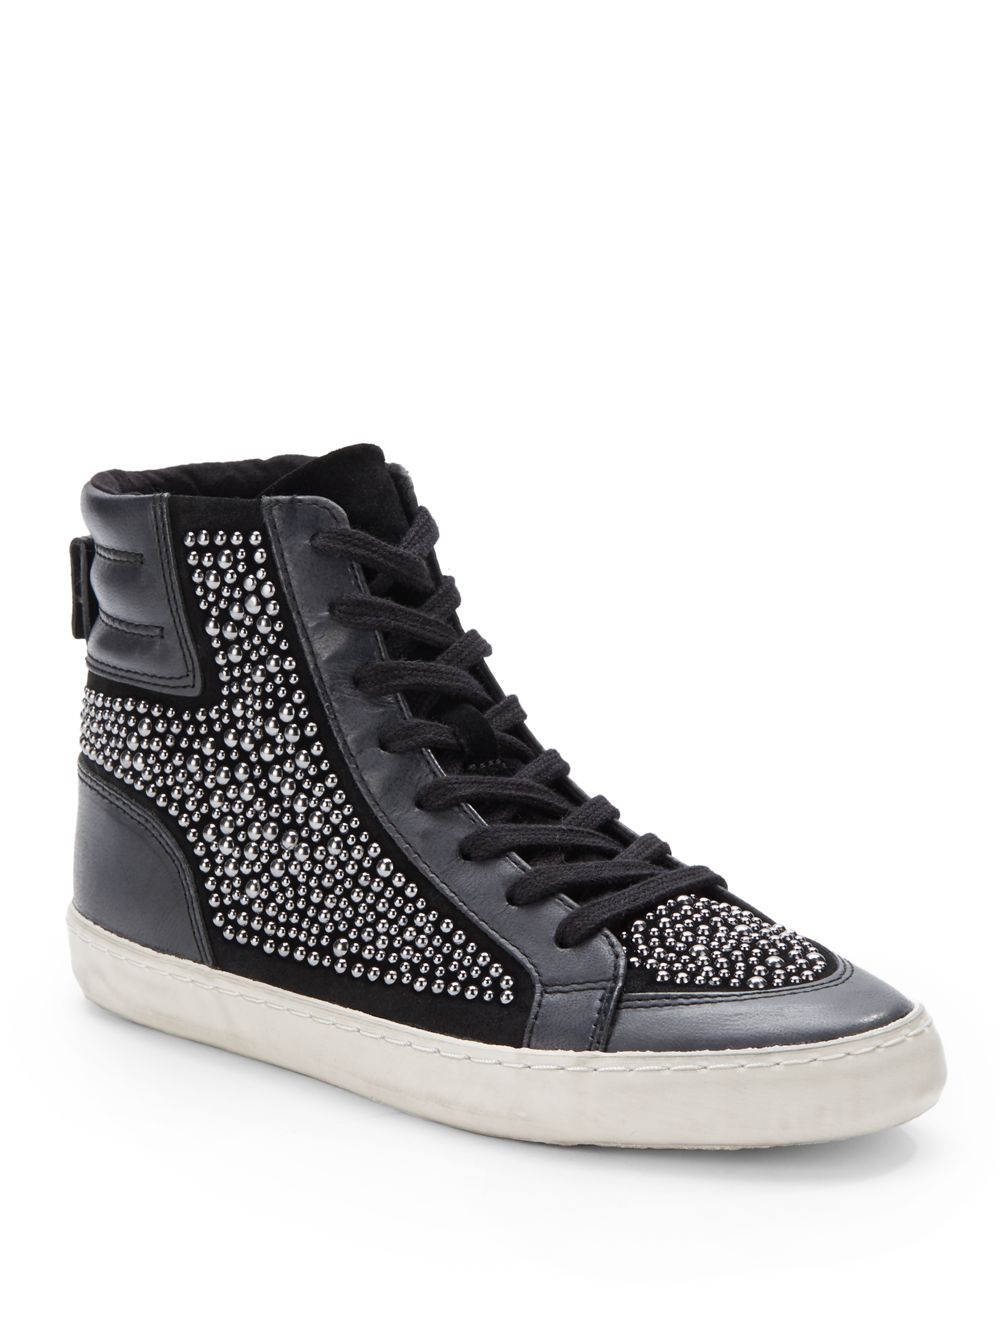 Lyst - French Connection Louise Studded High-top Sneakers in Black